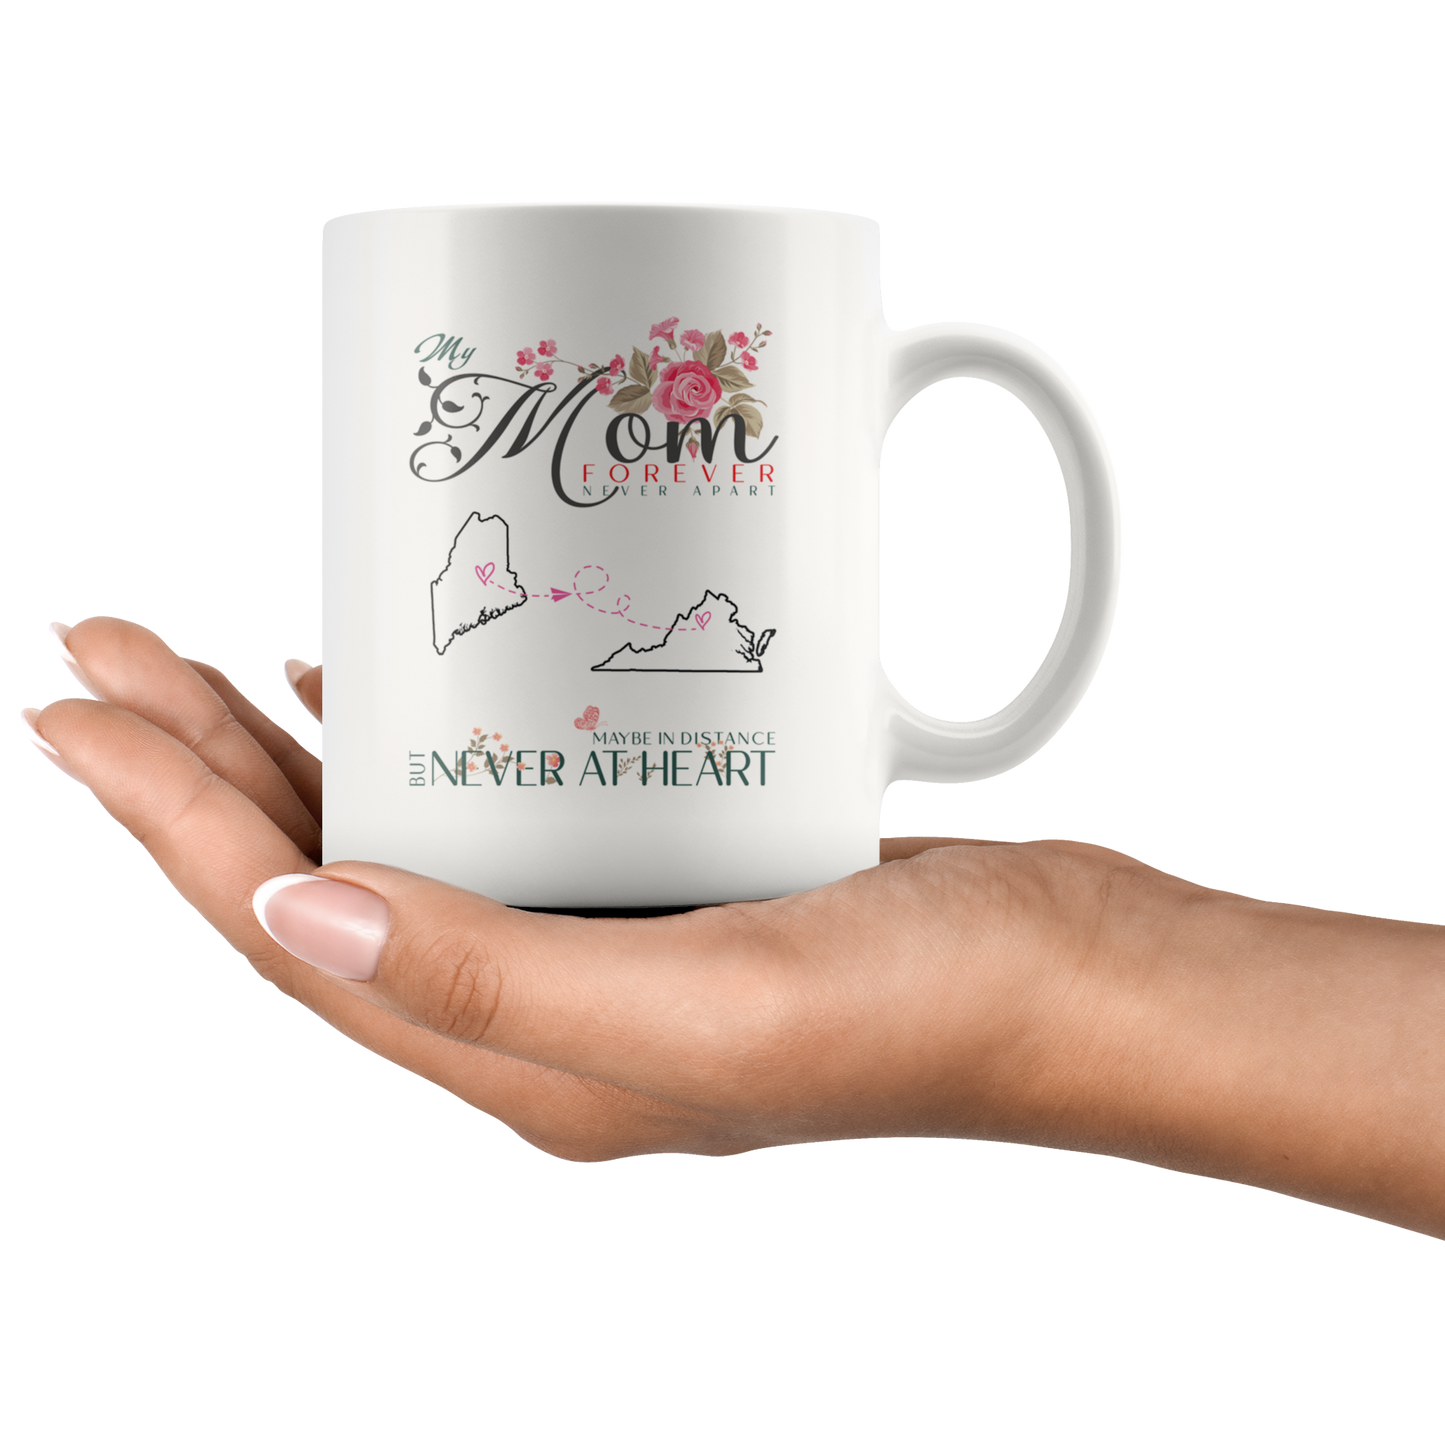 M-20321571-sp-23626 - [ Maine | Virginia ]Personalized Mothers Day Coffee Mug - My Mom Forever Never A